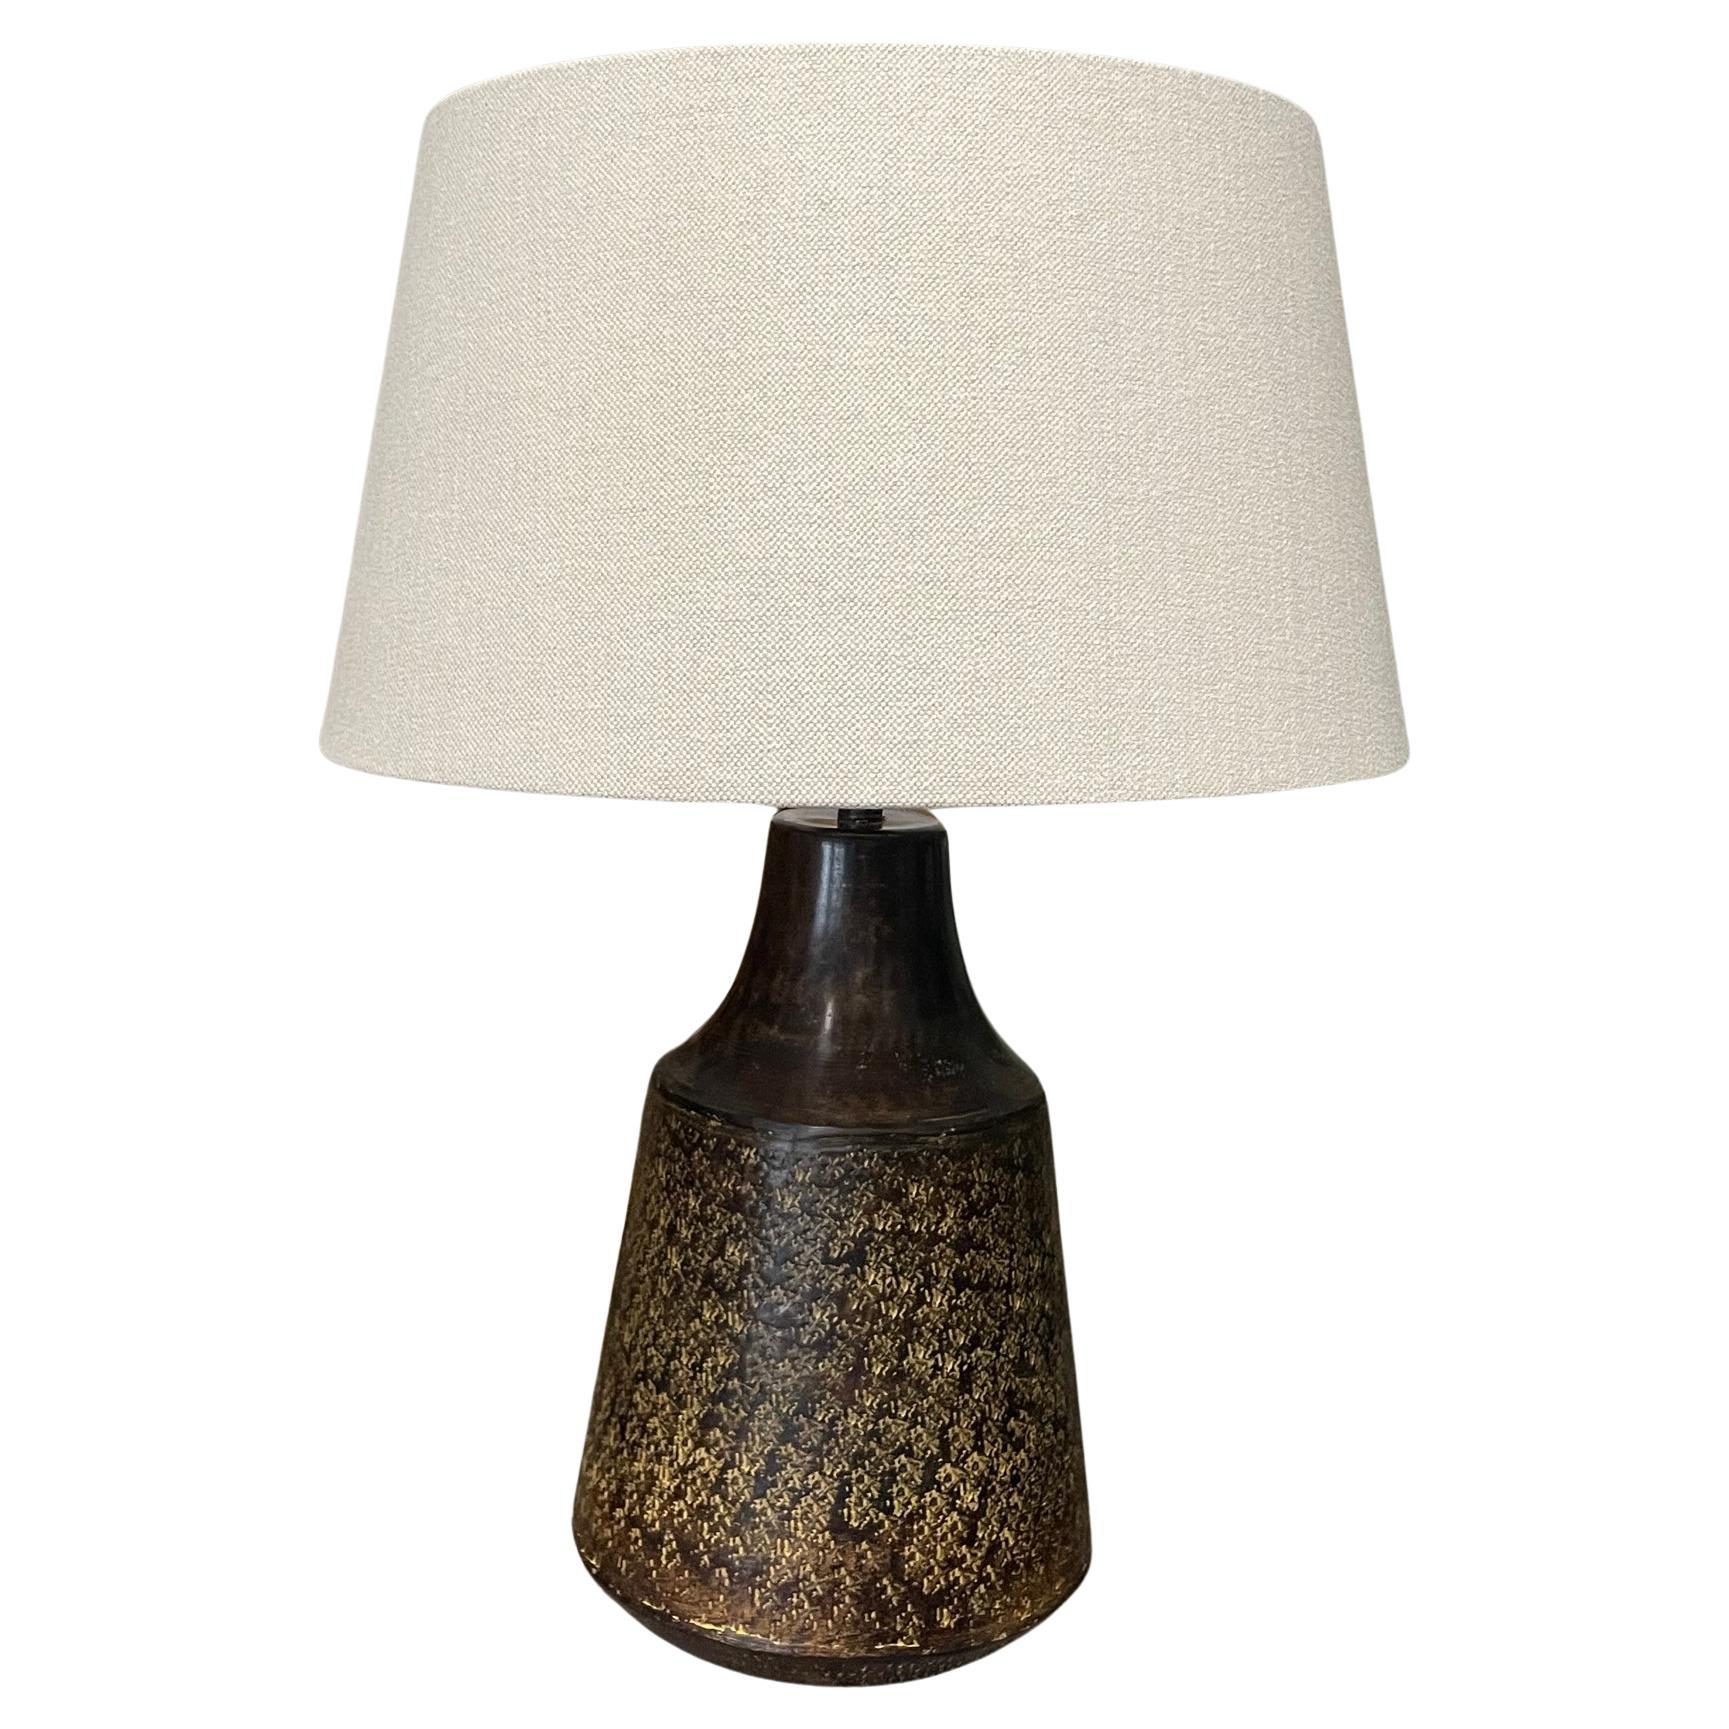 Contemporary Chinese pair textured metal lamps.
Top of base has mottled decorative pattern design.
Bottom of base is solid.
Belgian linen shades included.
Shade diameter 16